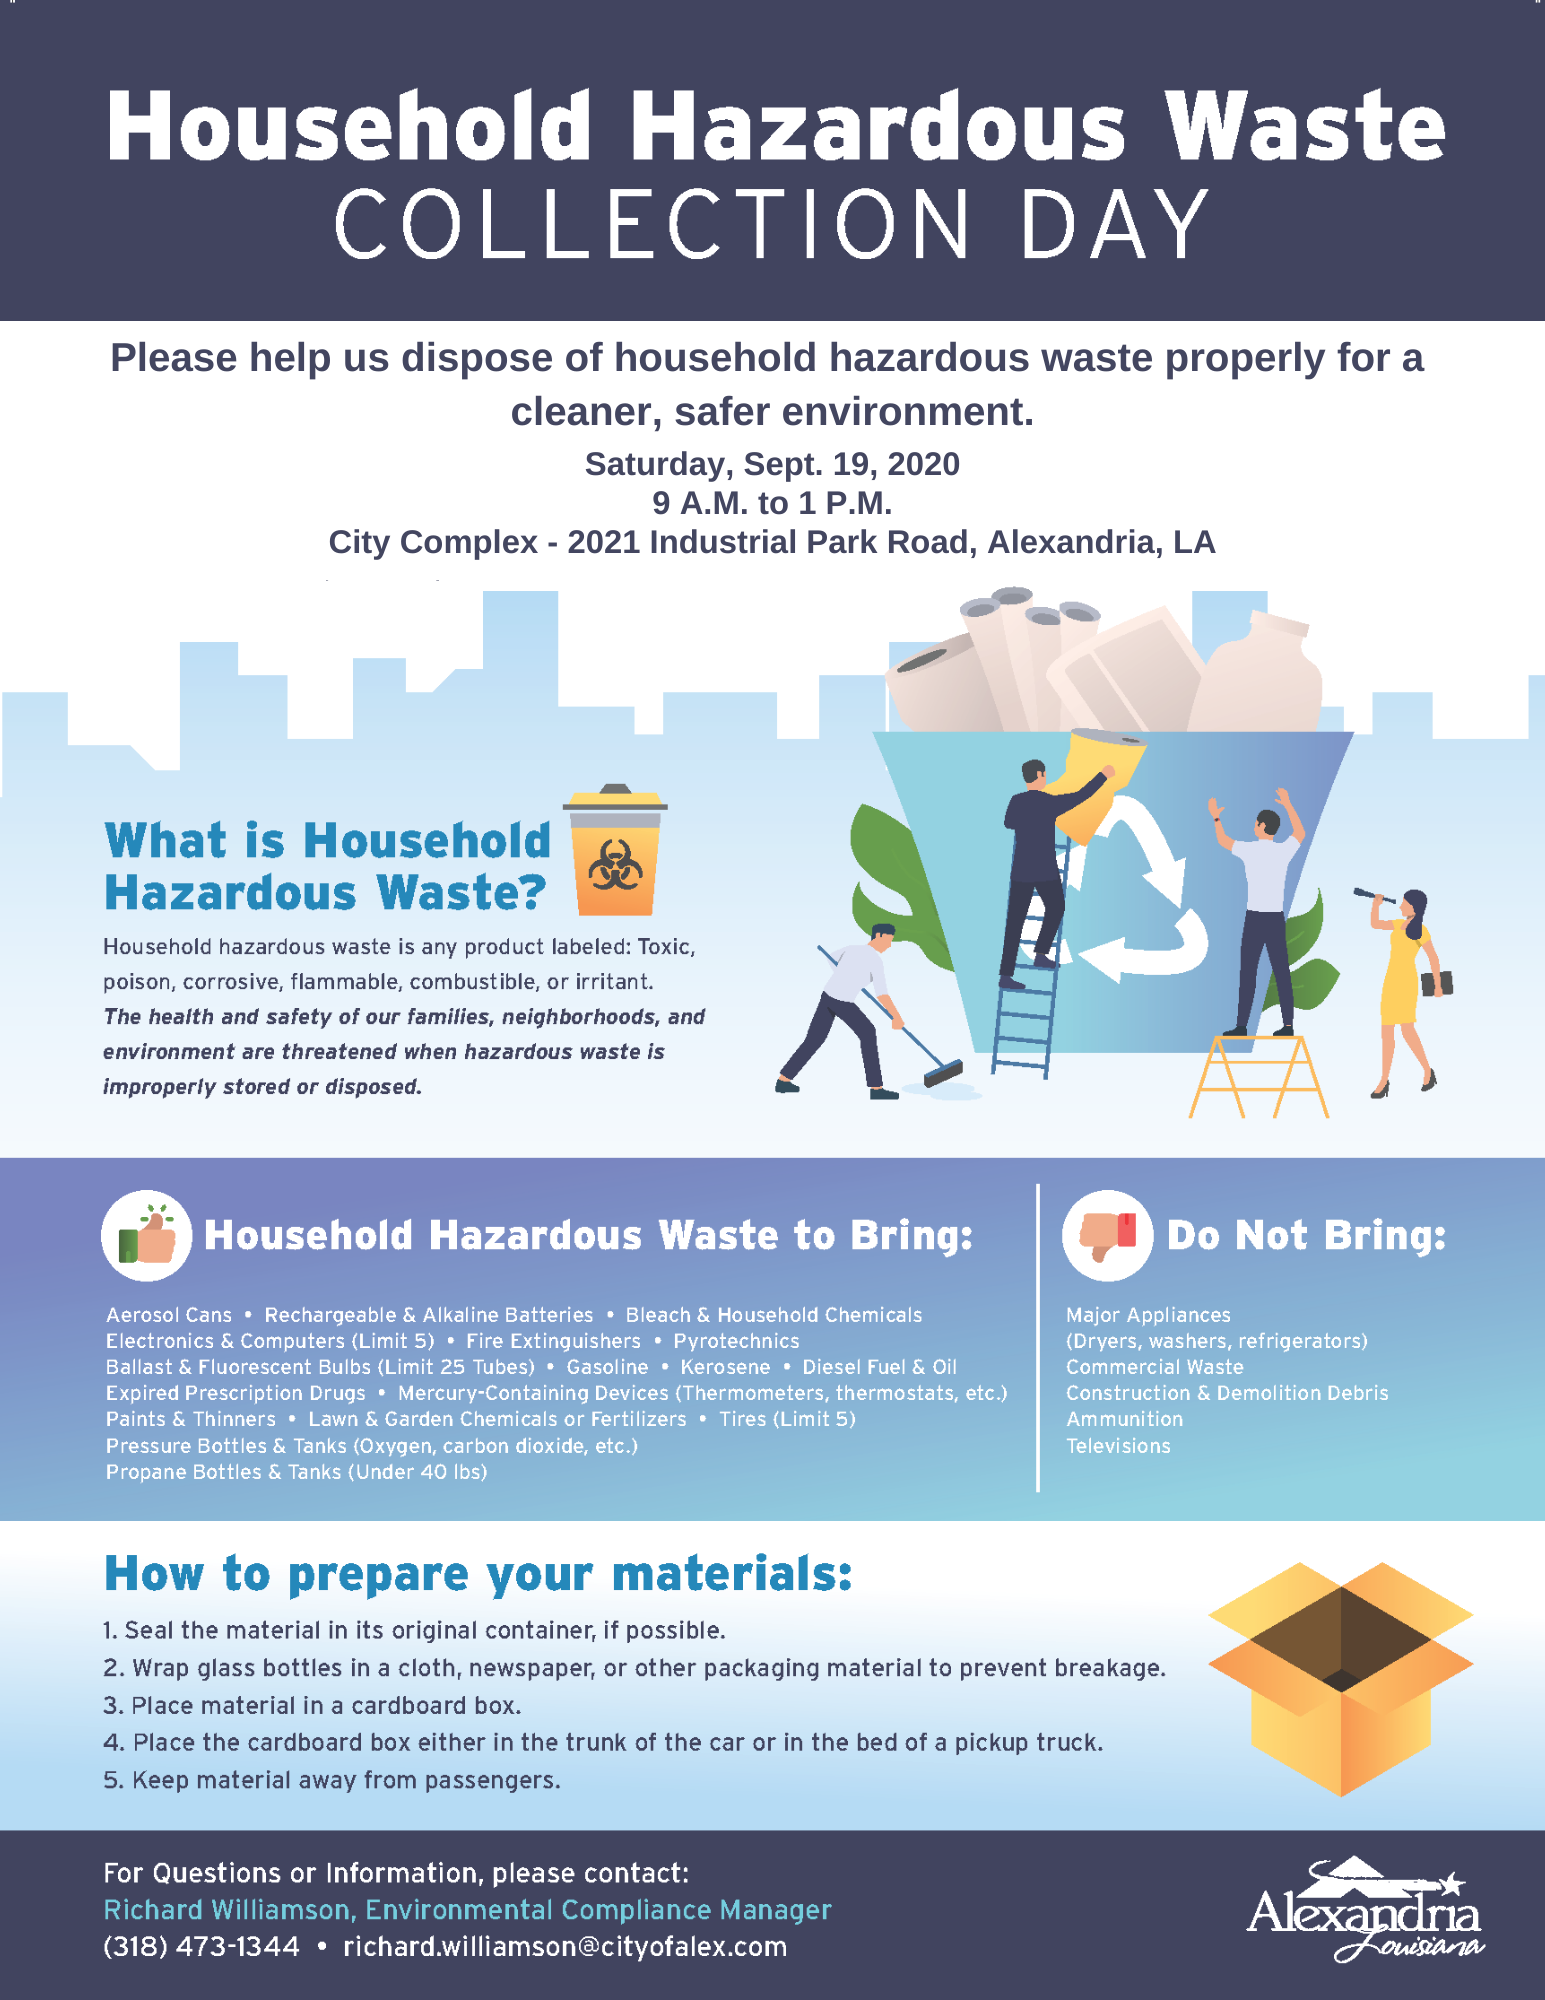 Household Hazardous Waste Collection Day  Please help us dispose of household hazardous waste properly for a celaner, safer environment.  Saturday, Sept. 19, 2020 9am - 1pm City Complex - 2021 Industrial Park Road Alexandria LA What is Household Hazardous Waste?  House hold hazardous waste is any product labeled: Toxic, poison, corrosive, flammable, combustible or irritant. The health and safety of our families, neighborhoods and environment are threatened when hazardous waste is improperly stored or dispos